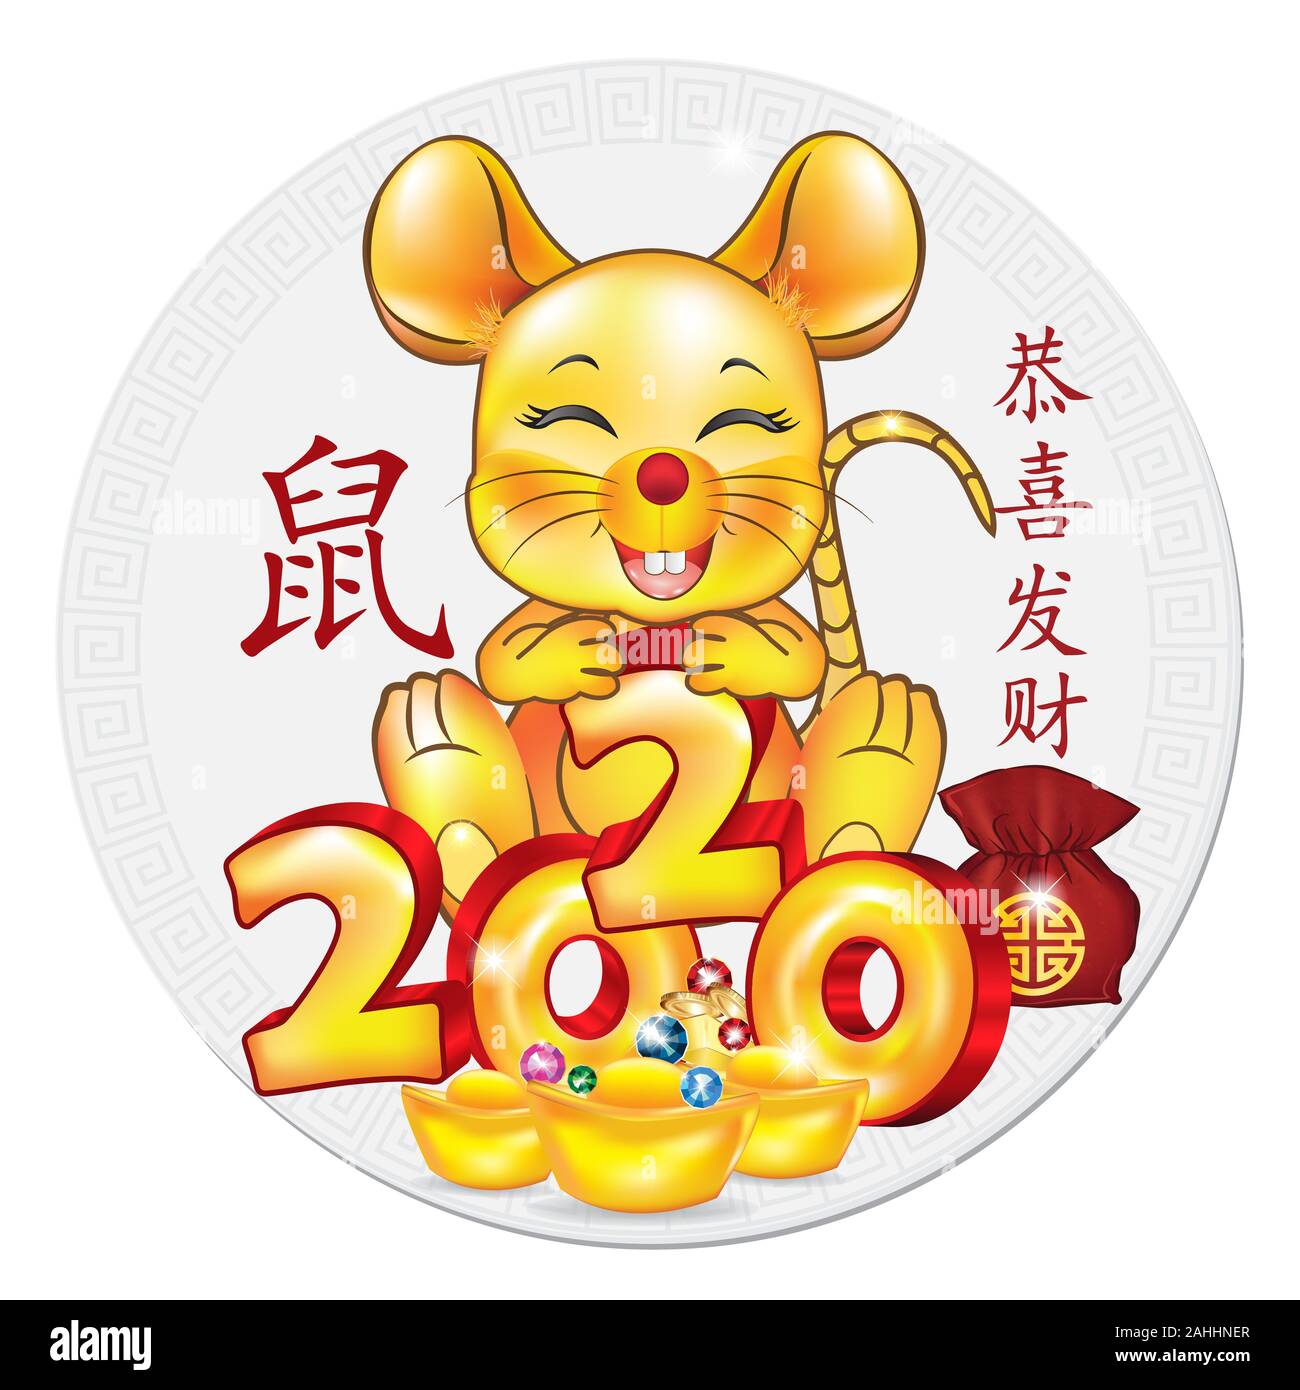 Happy Chinese New Year of the Rat 2020 - round illustration for print. Text translation: Congratulations and make fortune. Year of the Rat. Stock Photo